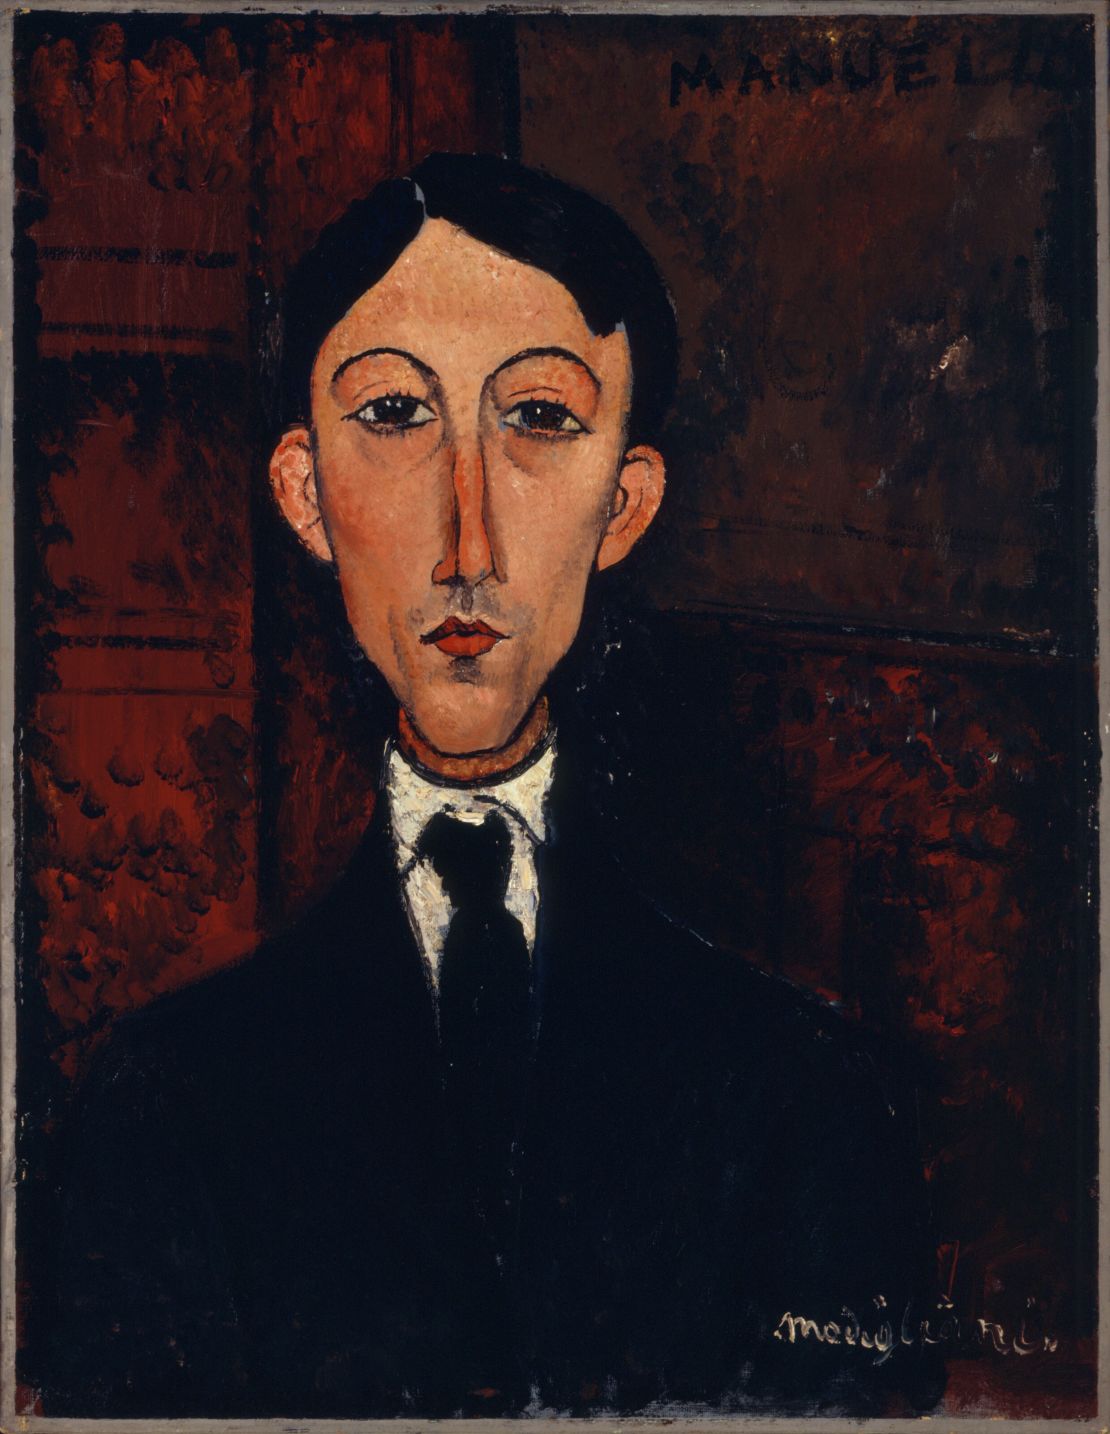 "There is still so much to learn about Modigliani as an artist," said Nancy Ireson, chief curator of the Barnes.